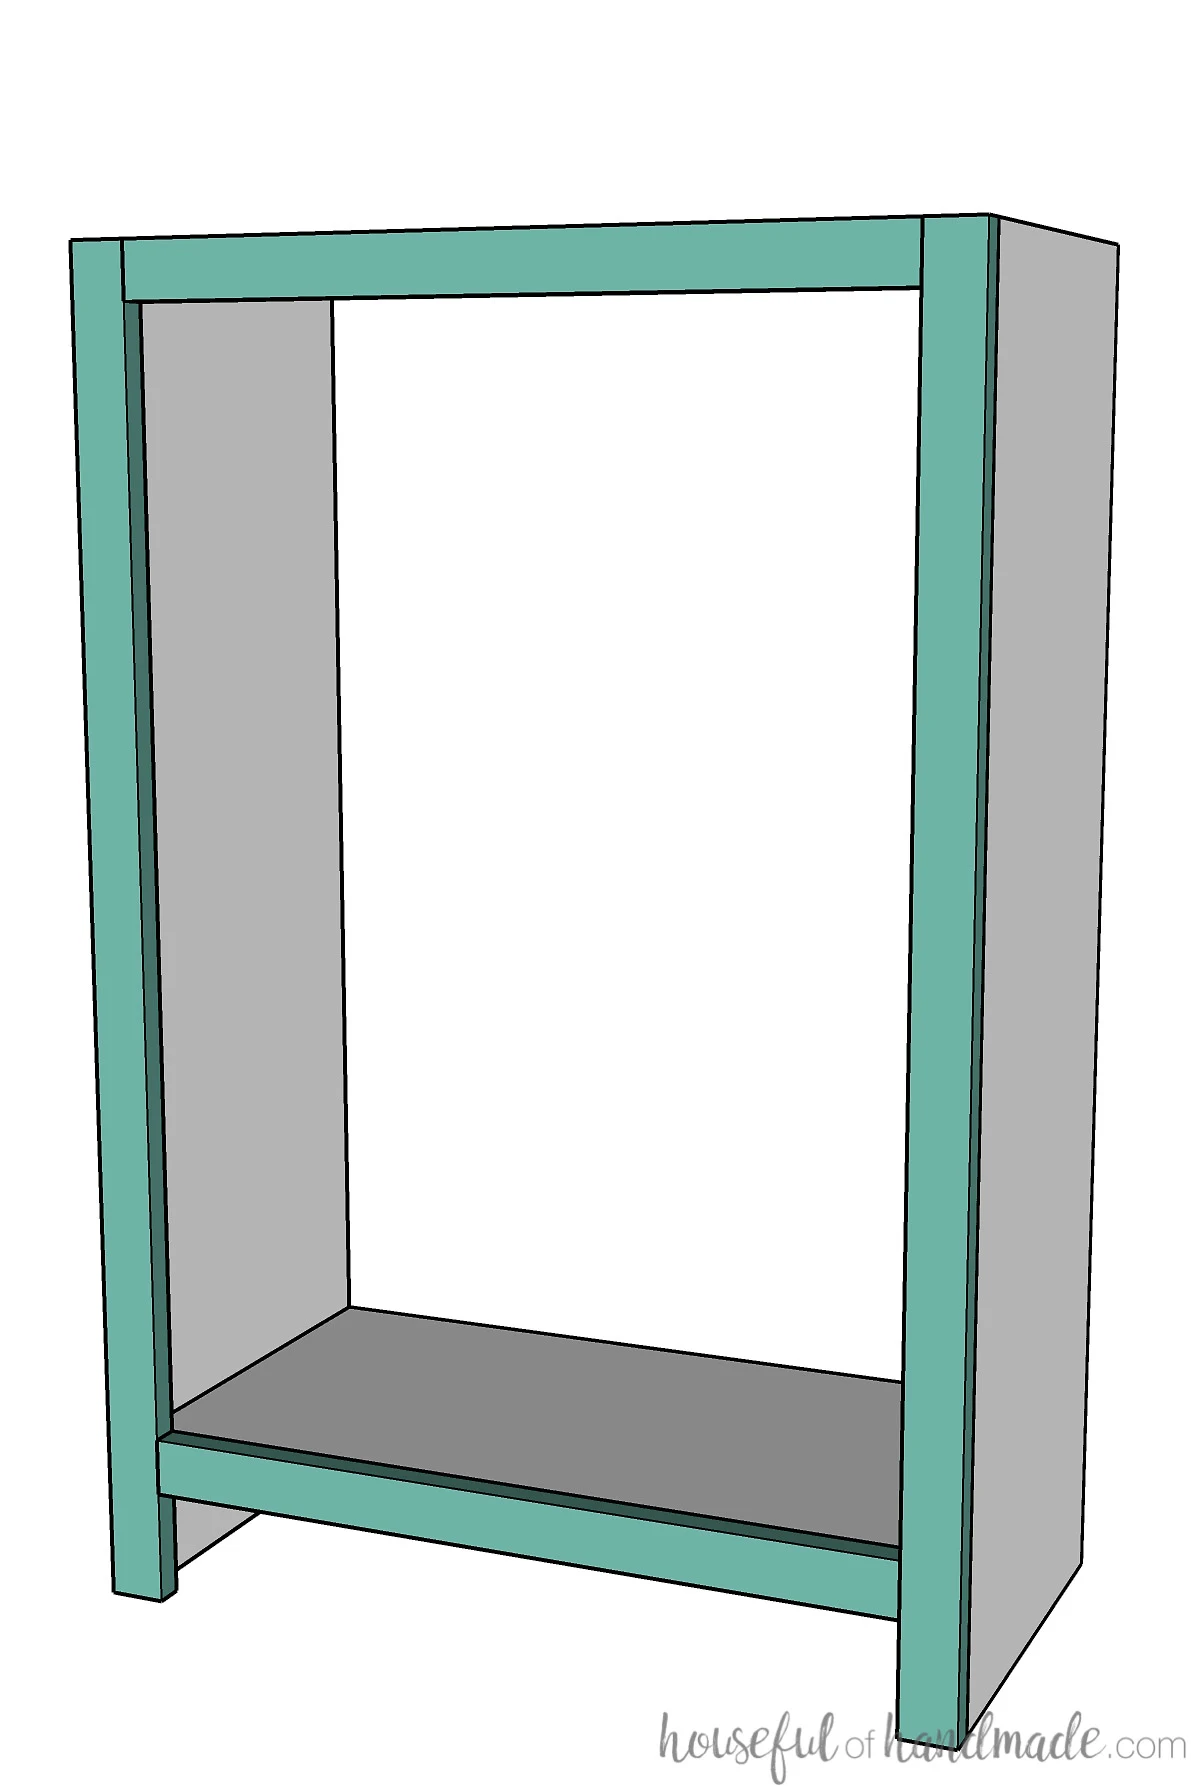 Sketch of DIY bookshelf with the face frame attached. 